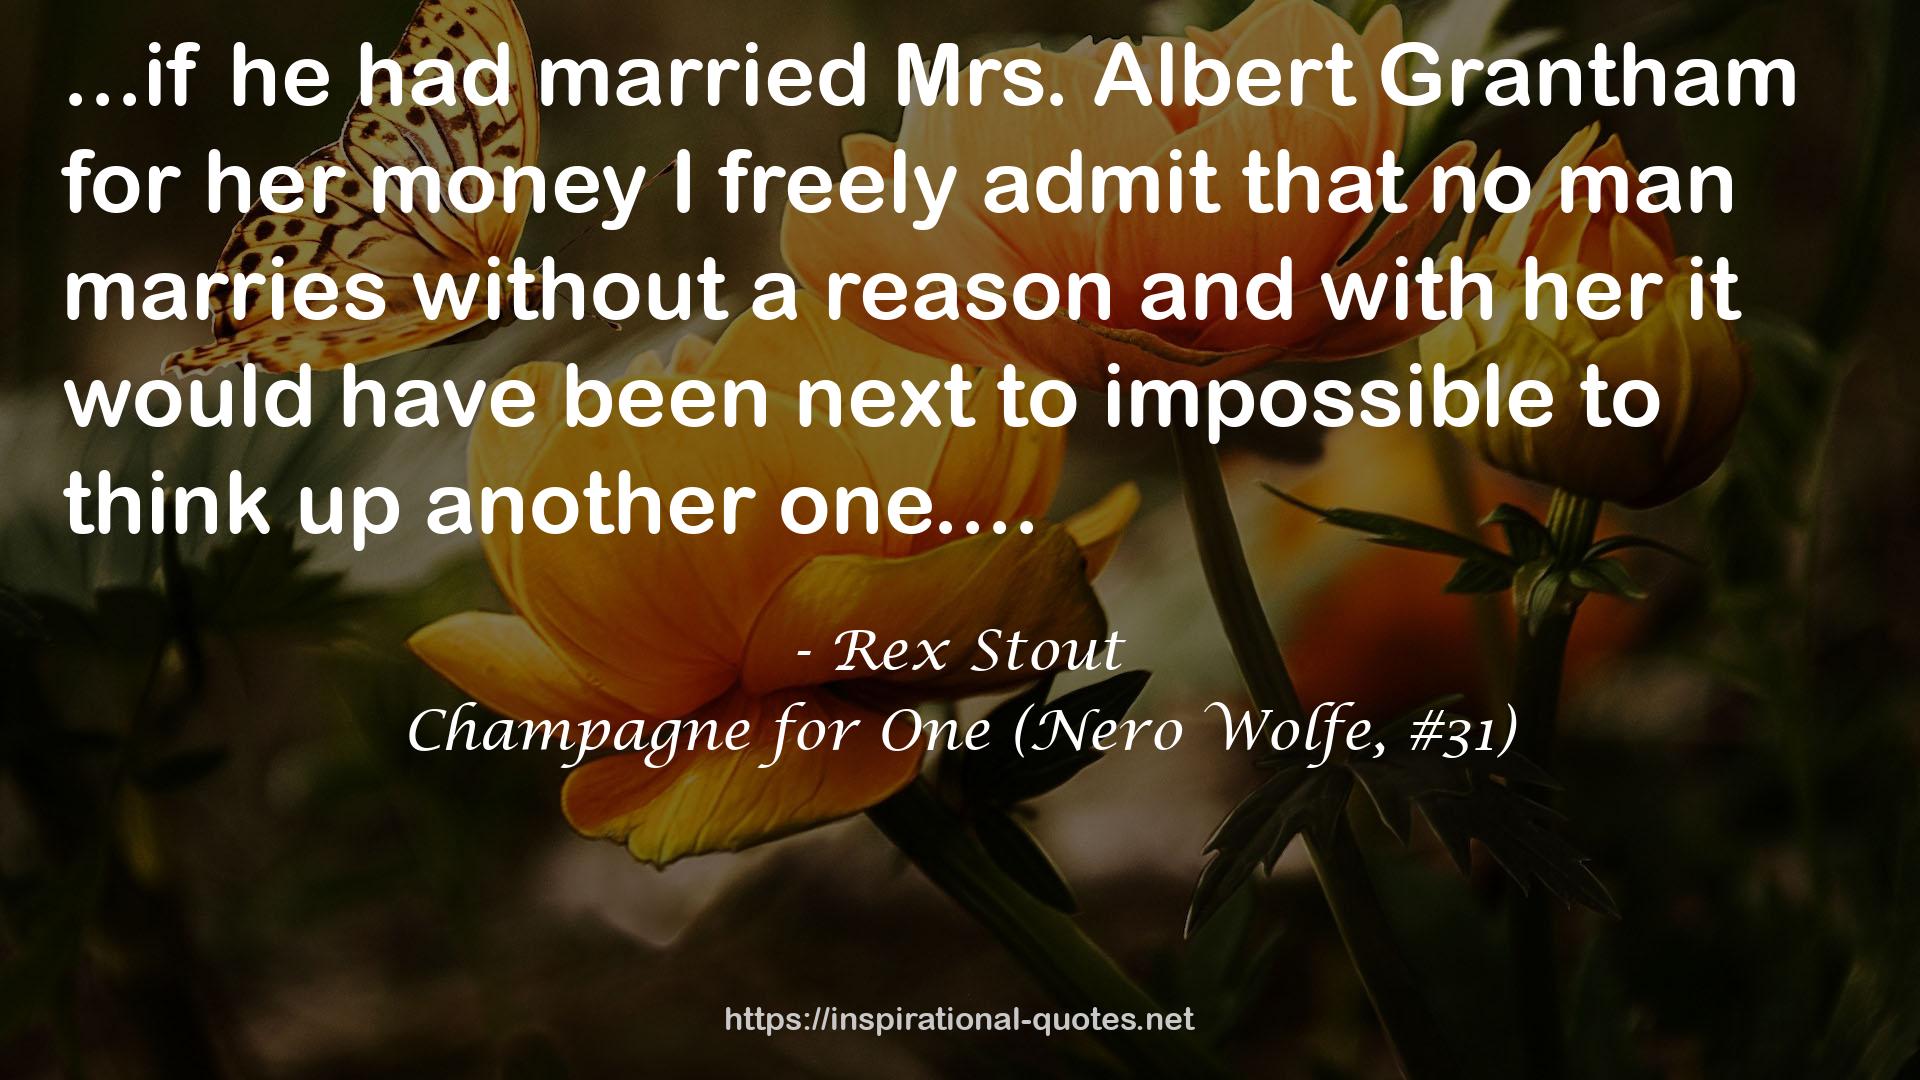 Champagne for One (Nero Wolfe, #31) QUOTES